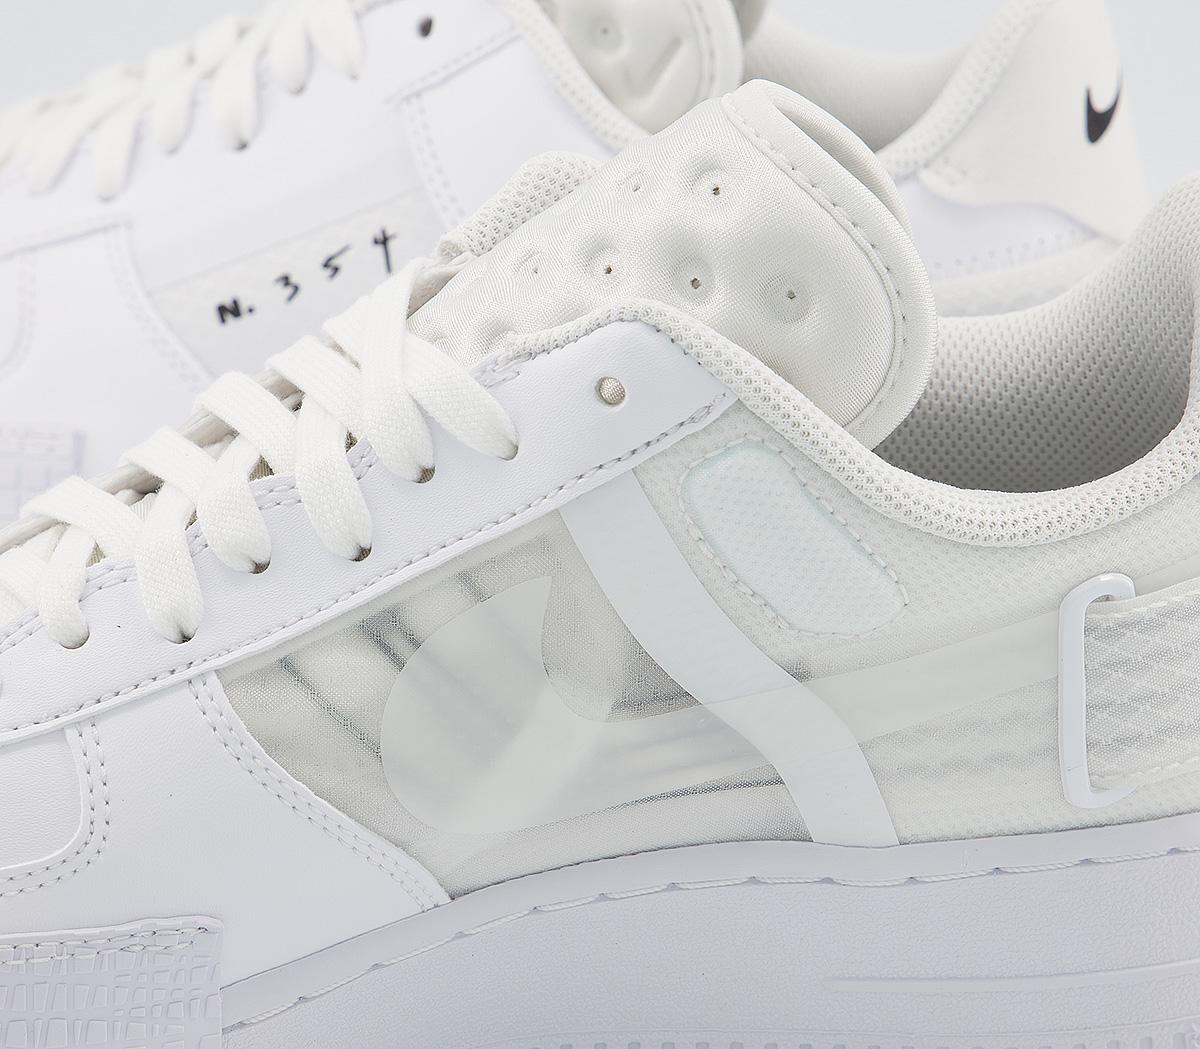 Nike Air Force 1 Type White Black - His trainers